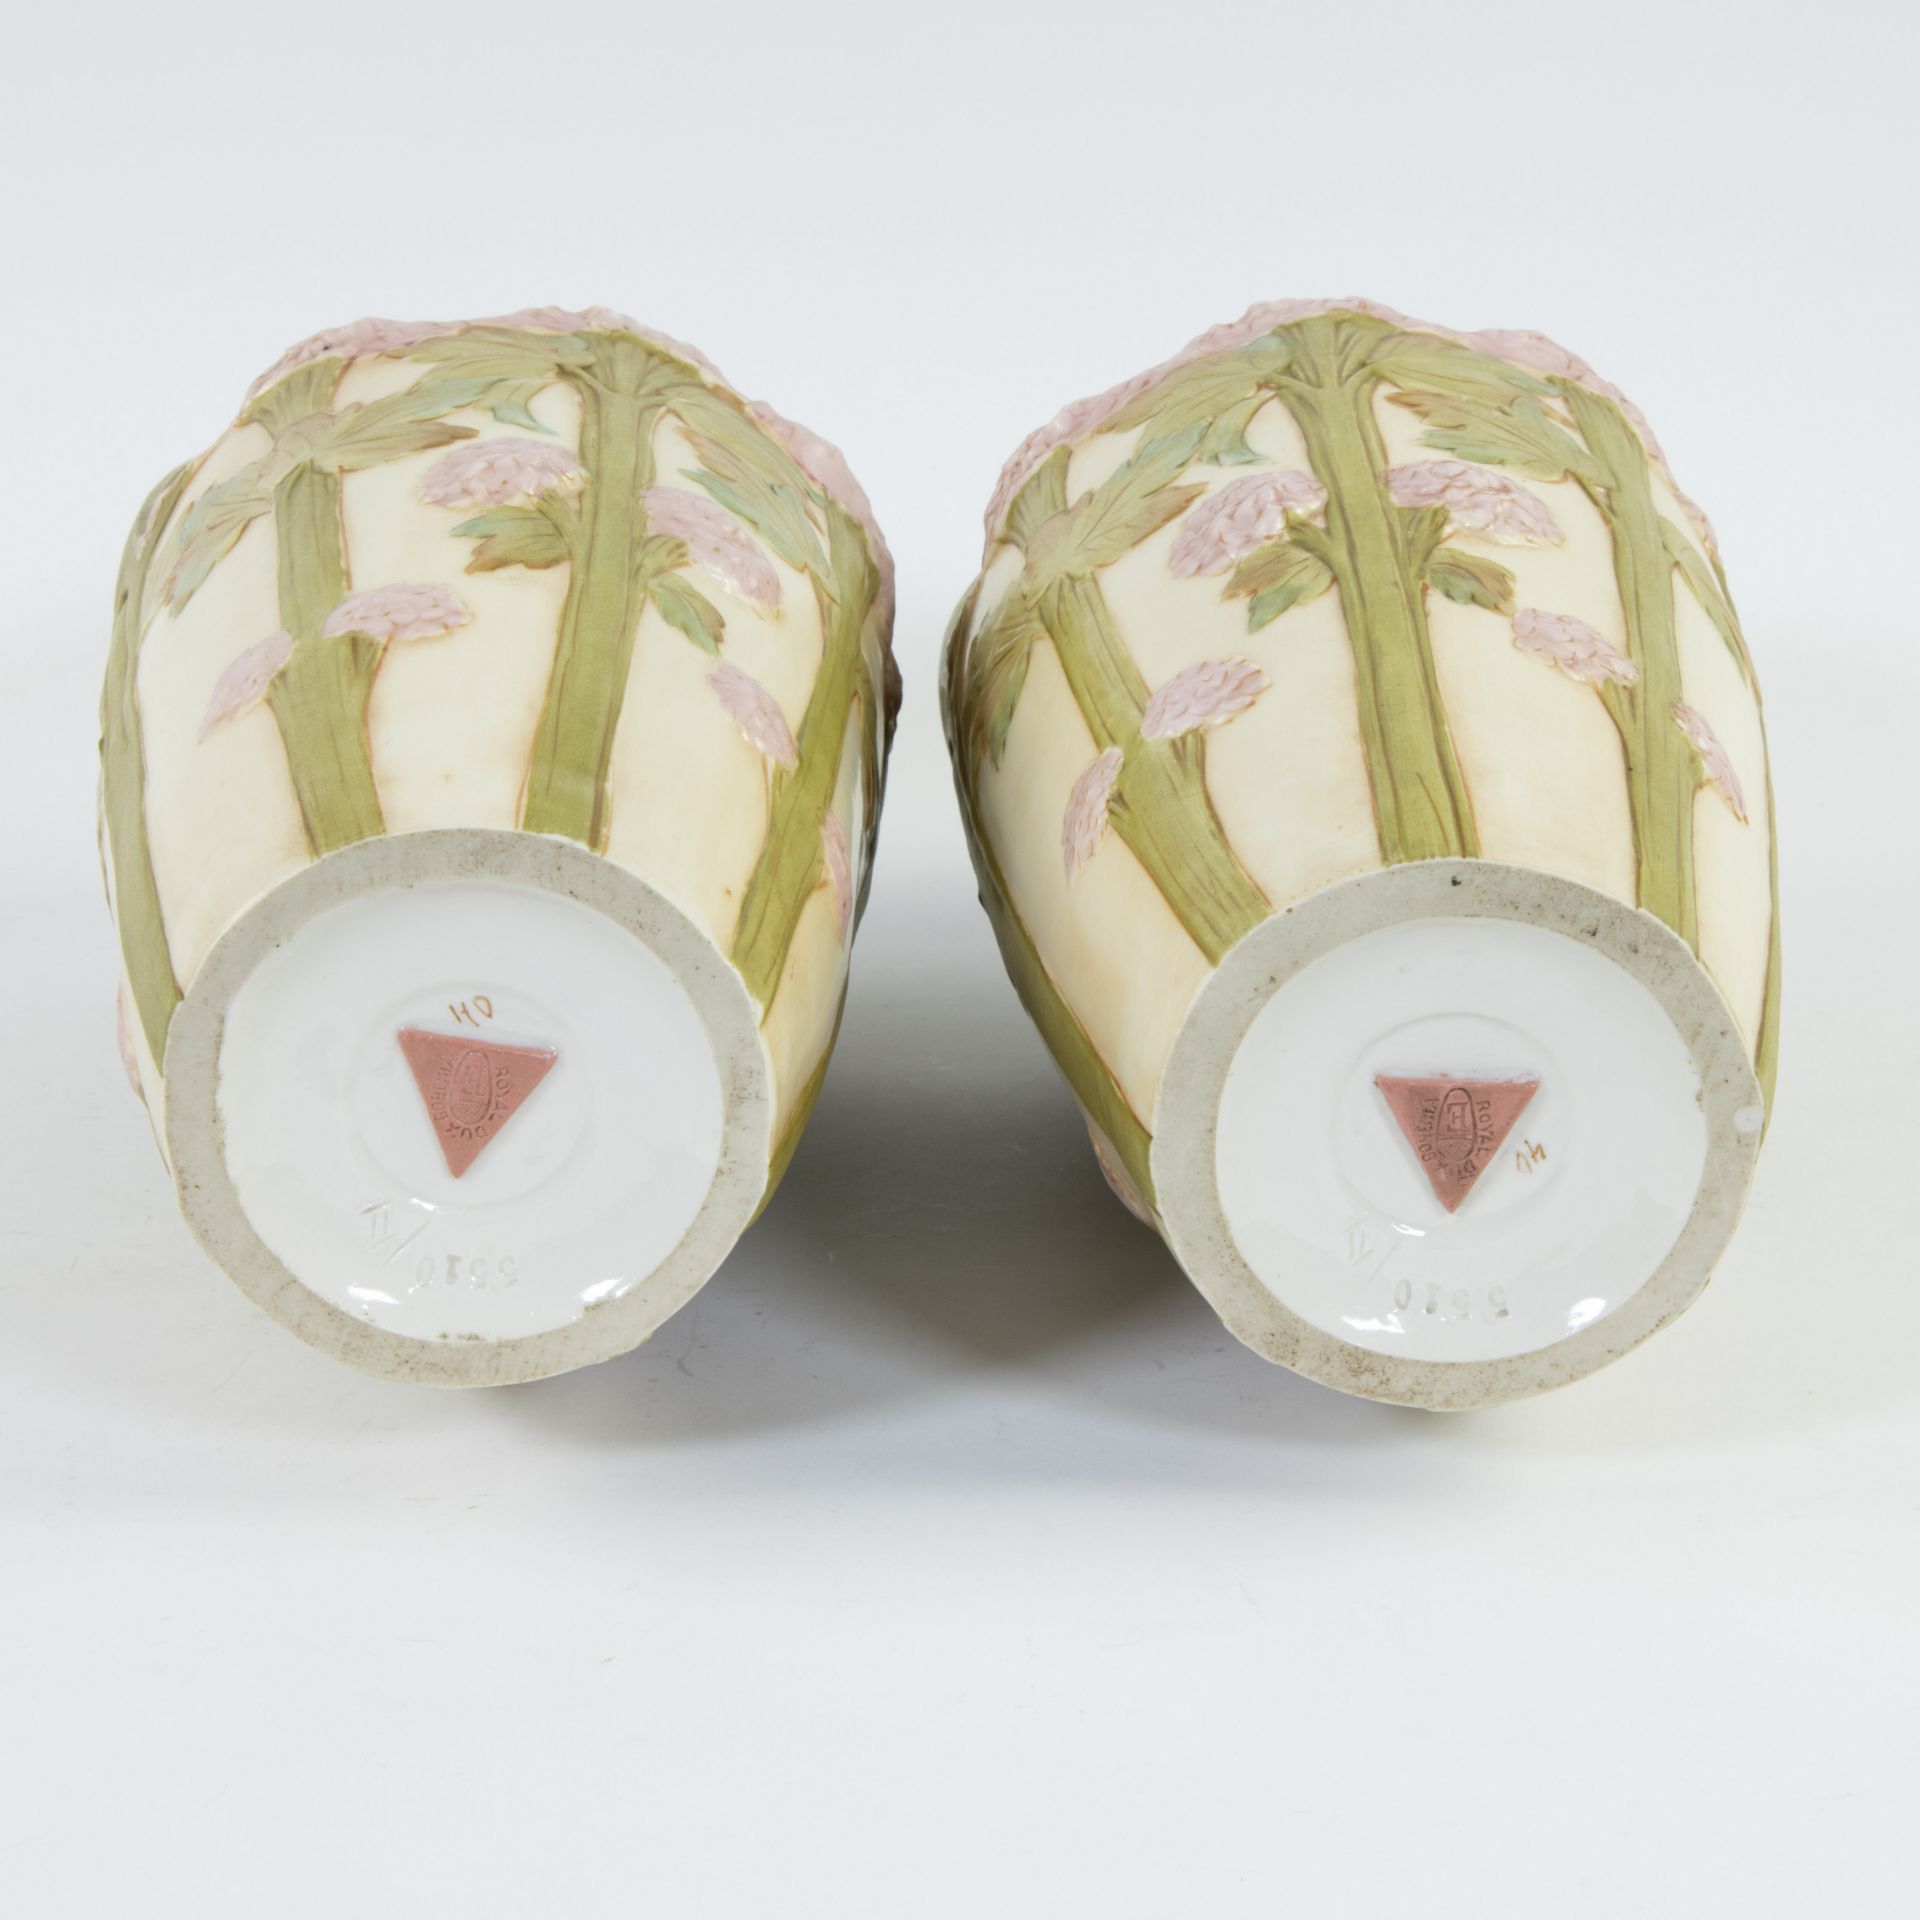 Pair of Art Nouveau Royal Dux vases with decor of stems with flowers, marked and a vide poche with d - Image 6 of 9